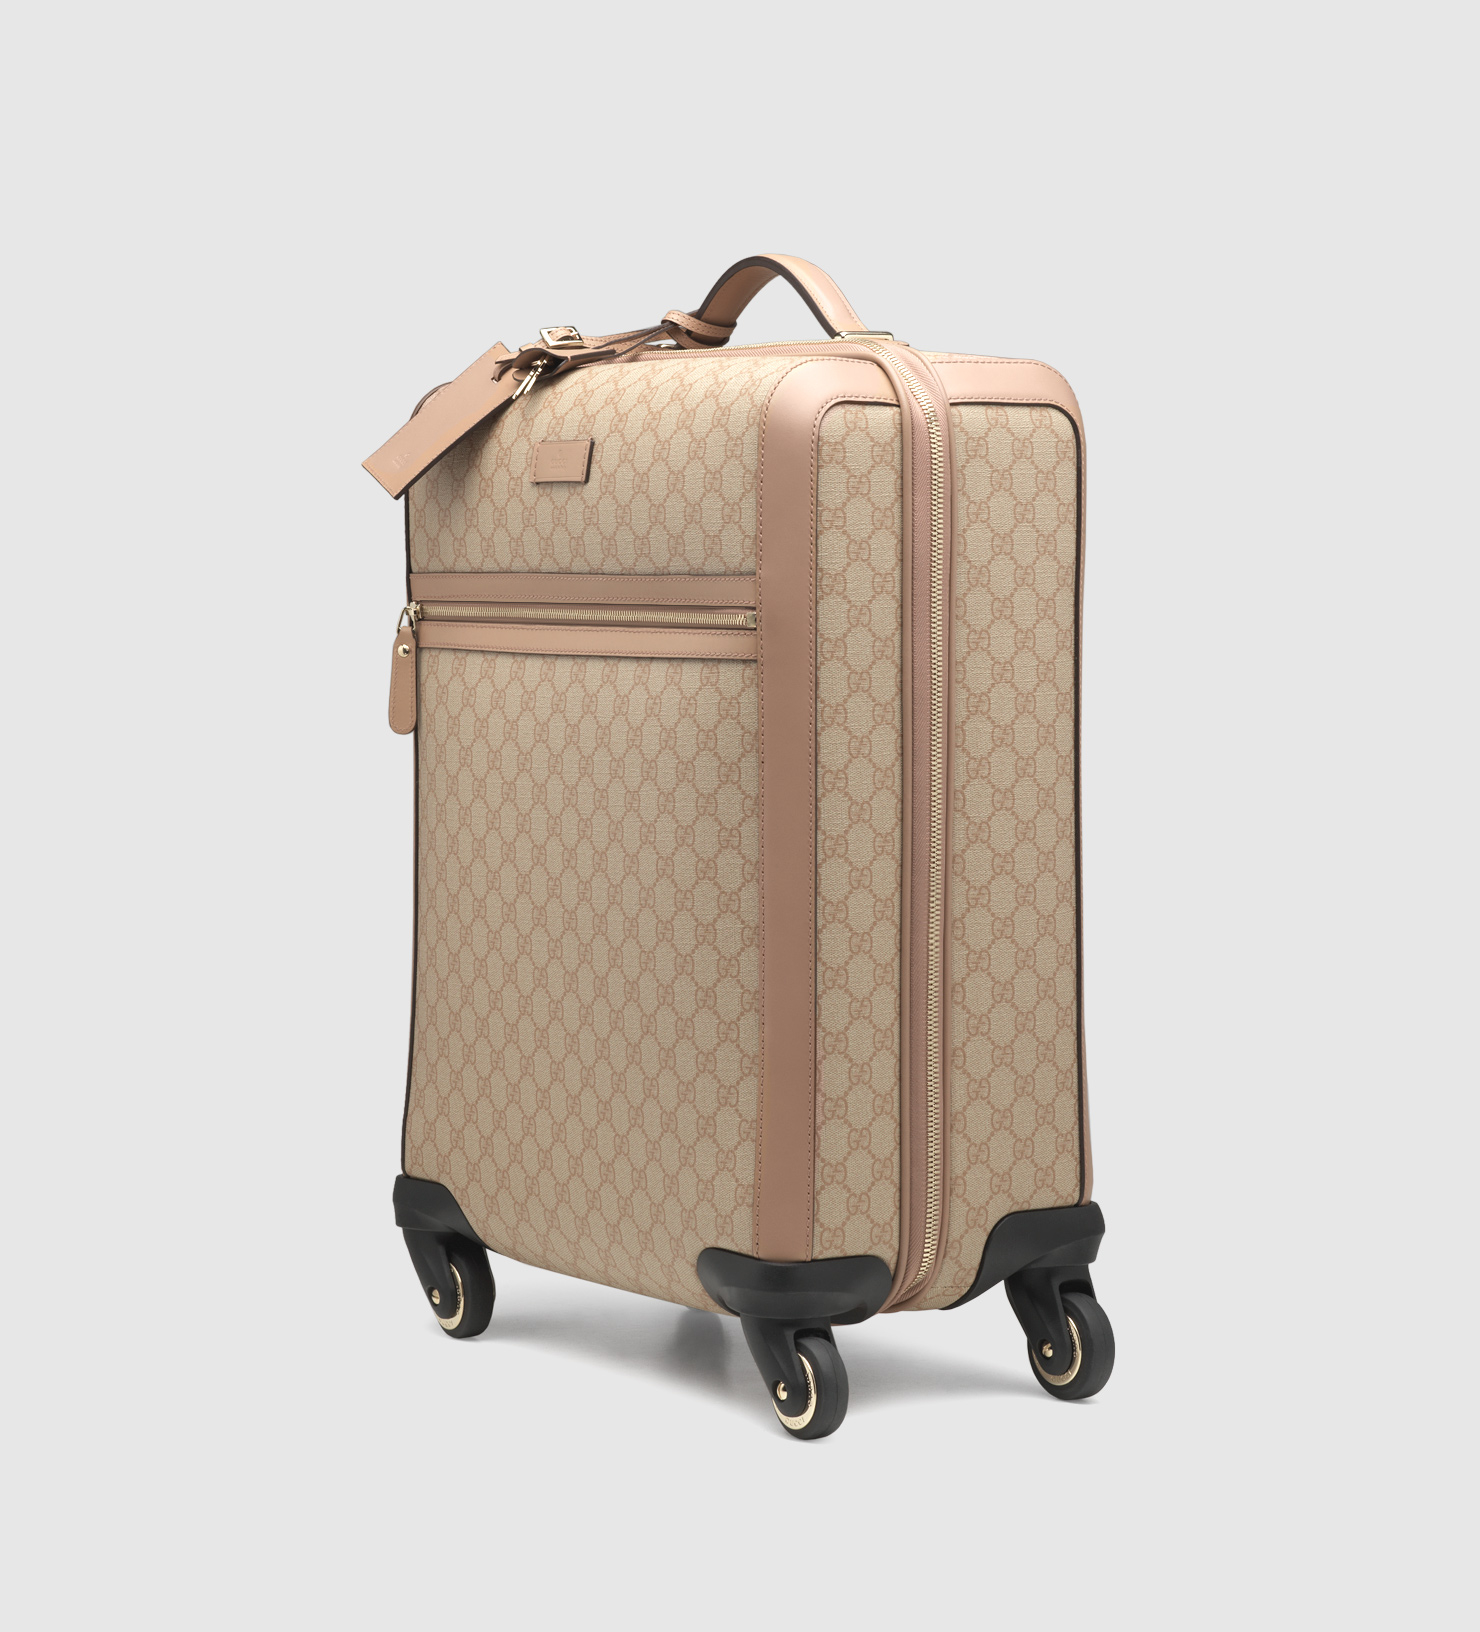 Gucci Gg Supreme Canvas Four Wheel Carry-on Suitcase in Natural | Lyst